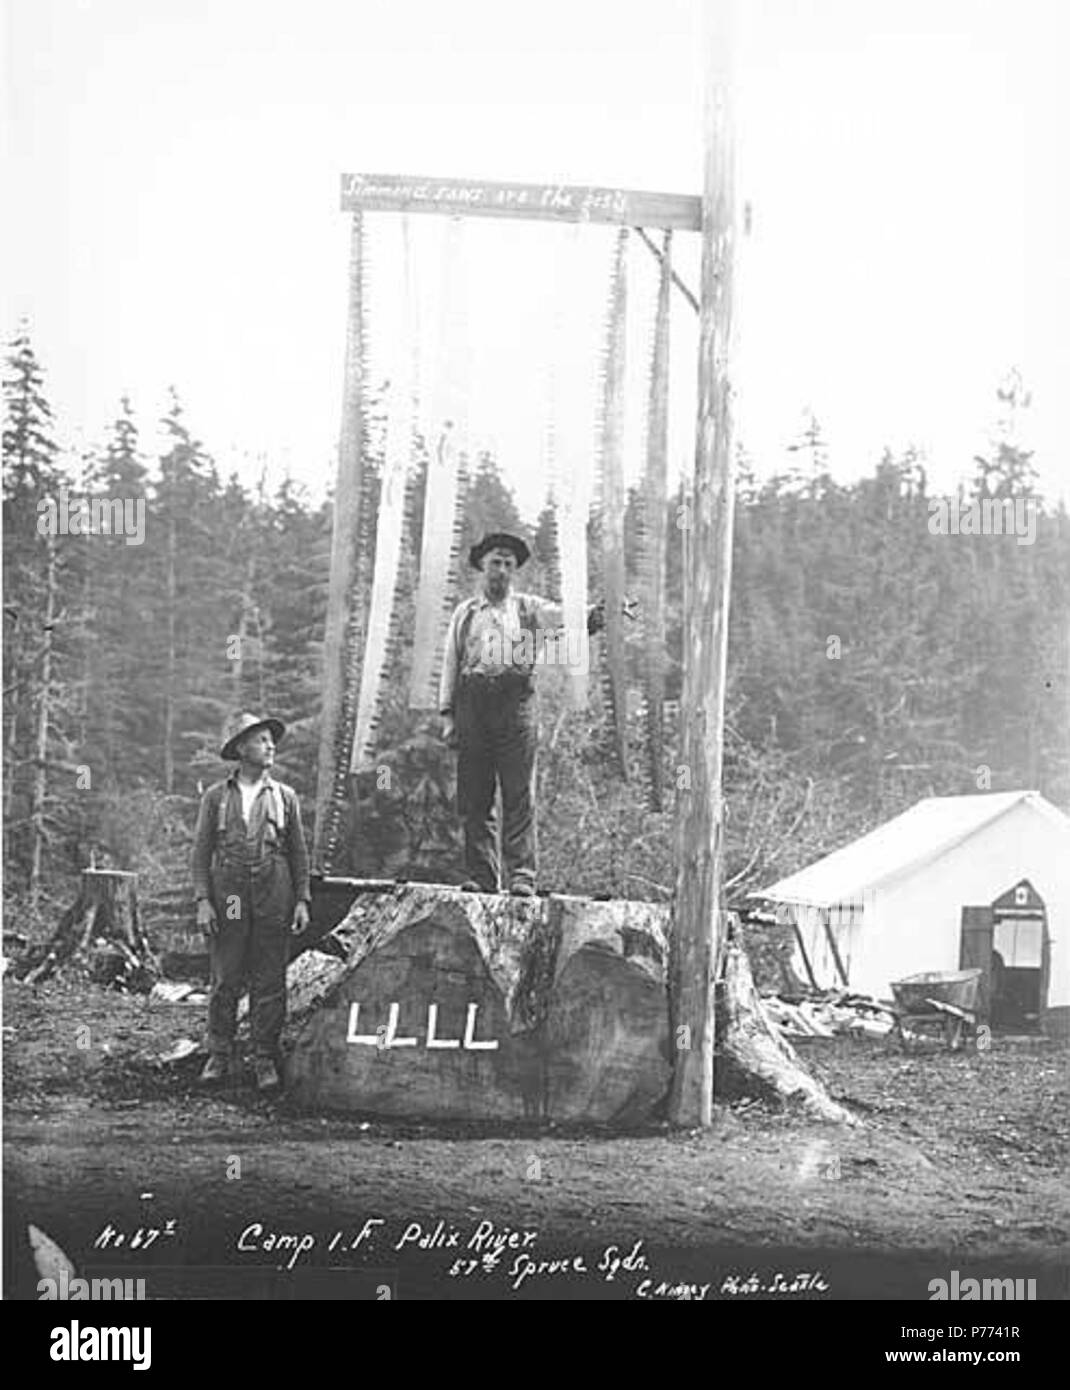 . English: Loggers with assortment of saws standing on stump which reads LLLL (for Loyal Legion of Loggers and Lumbermen) and below sign reading Simmond saws are the best, camp 1F, 57th Spruce Squadron, Palix River, ca. 1918 . English: Caption on image: Camp 1F, Palix River, 57th Spruce Sqdn. C. Kinsey Photo, Seattle. No. 67x PH Coll 516.4584 The Palix River rises in the high country south of South Bend in west central Pacific County and flows west to Willapa Harbor at Bay Center. Three forks of the river join in a wide tidal estuary. The name is Chinook Indian, meaning 'slough covered with tr Stock Photo